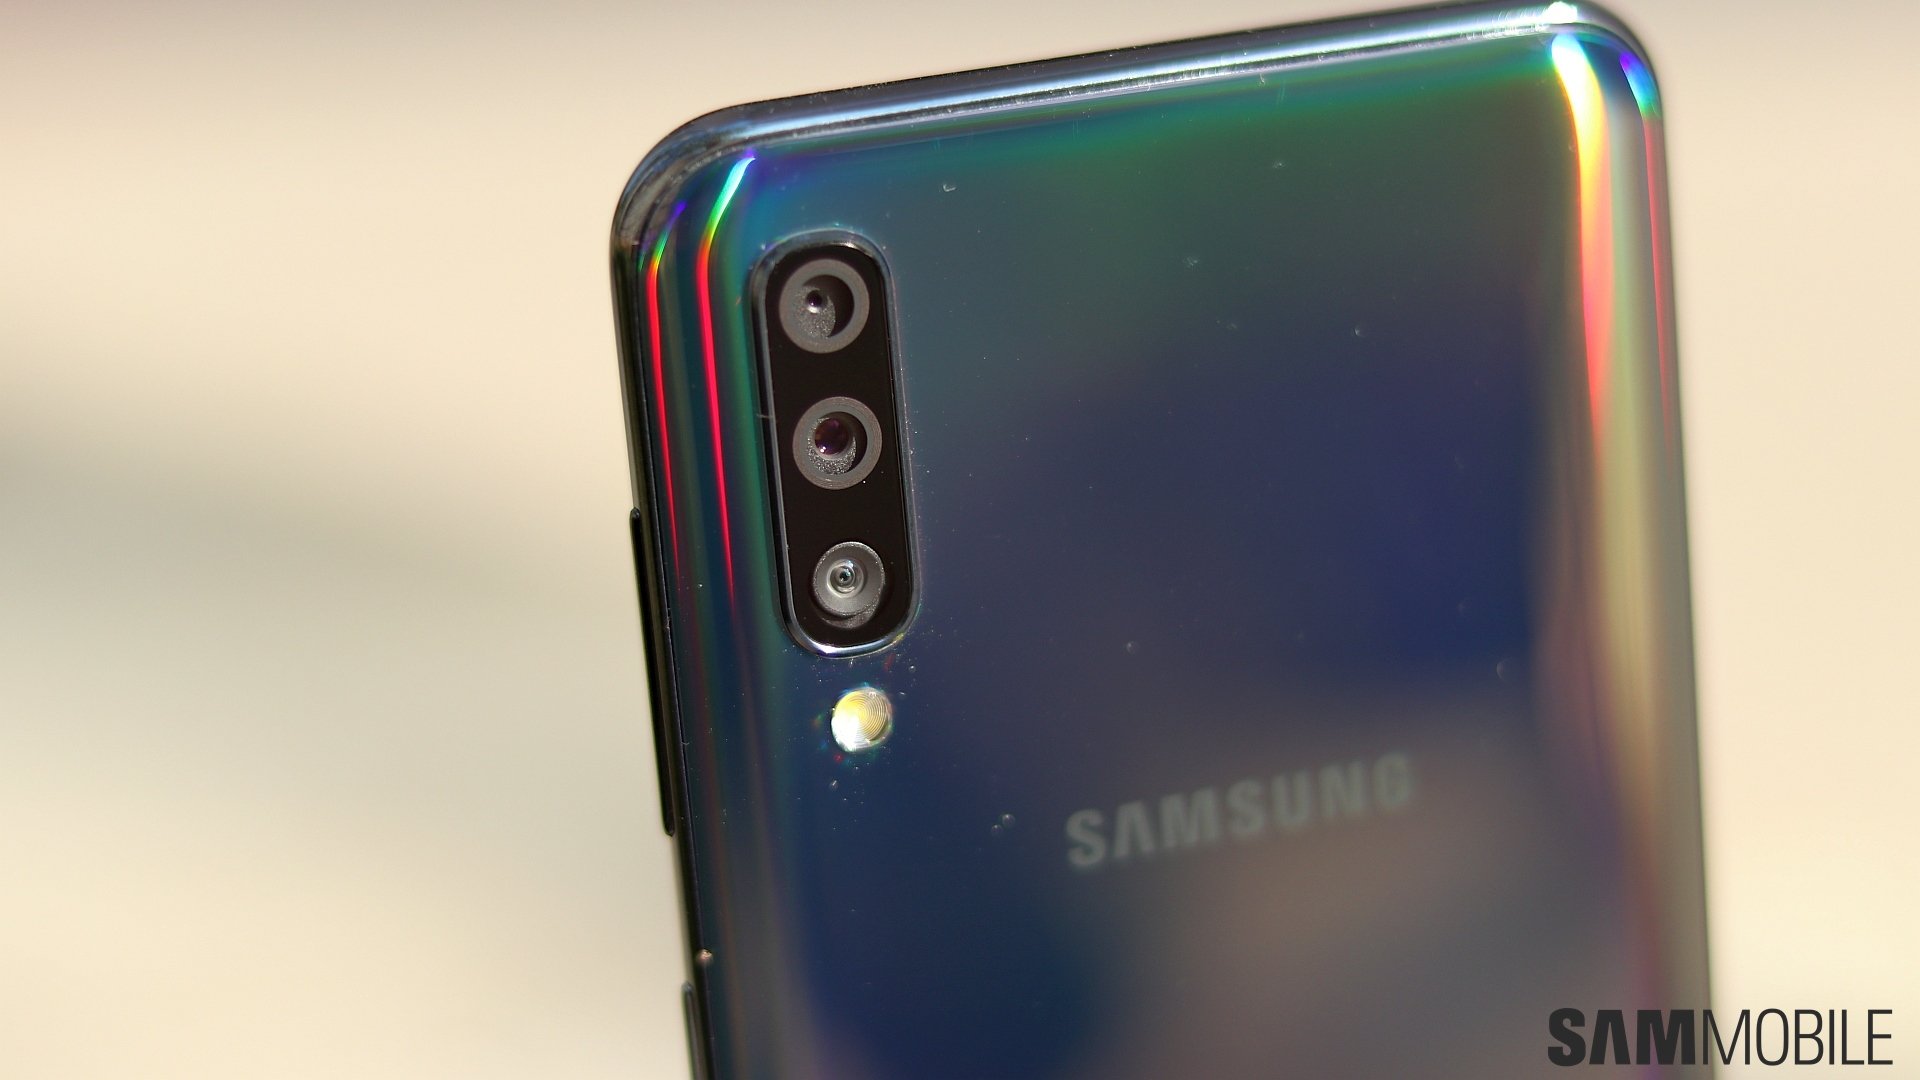 Galaxy A50 gets price cut in India, Galaxy M30 goes on open sale